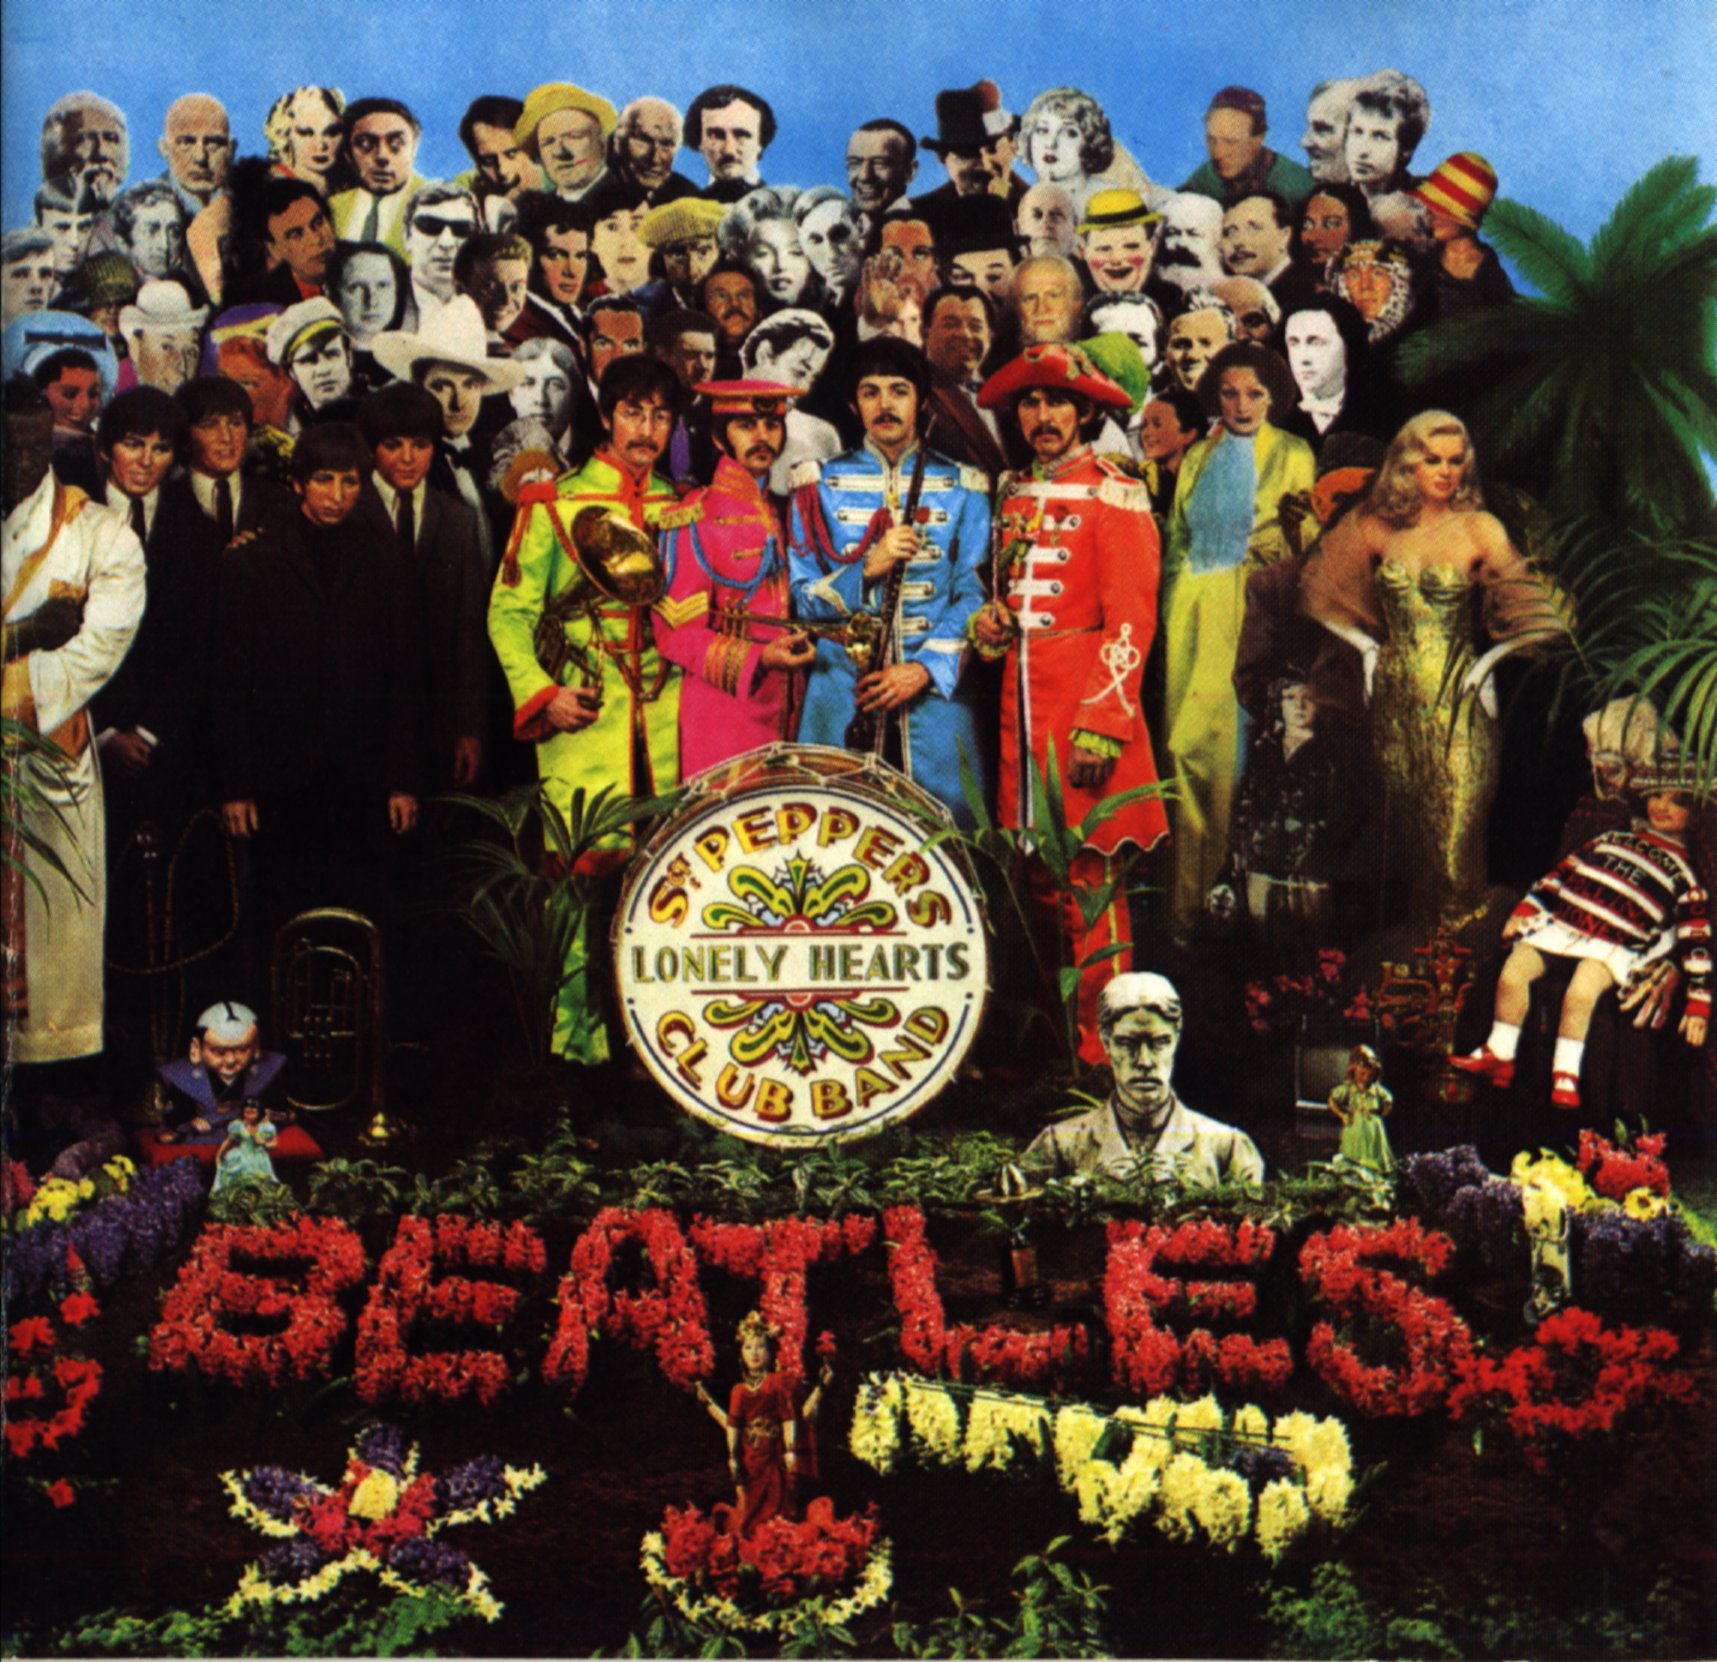 The Beatles - Sergent Peppers Lonely Hearts Club Band, 1967